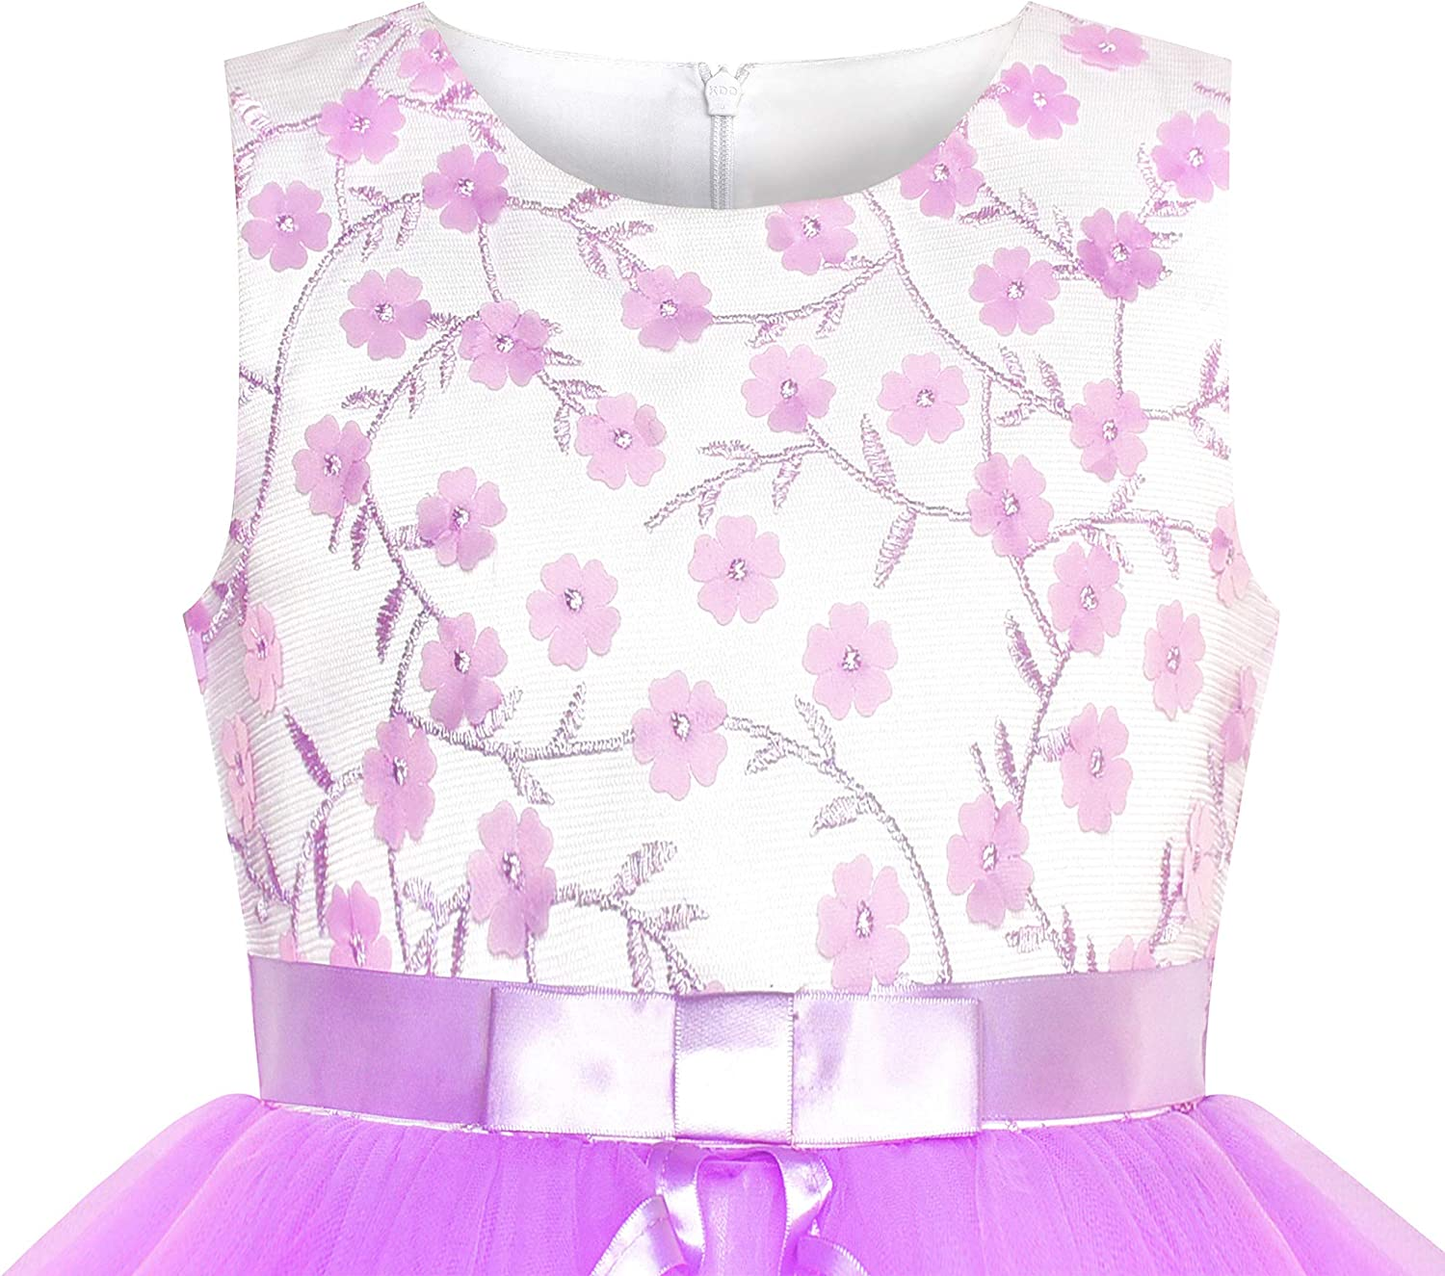 Purple Tiered Skirt Flower Girls Dress - Perfect for Weddings, Birthday Parties, and Special Occasions!